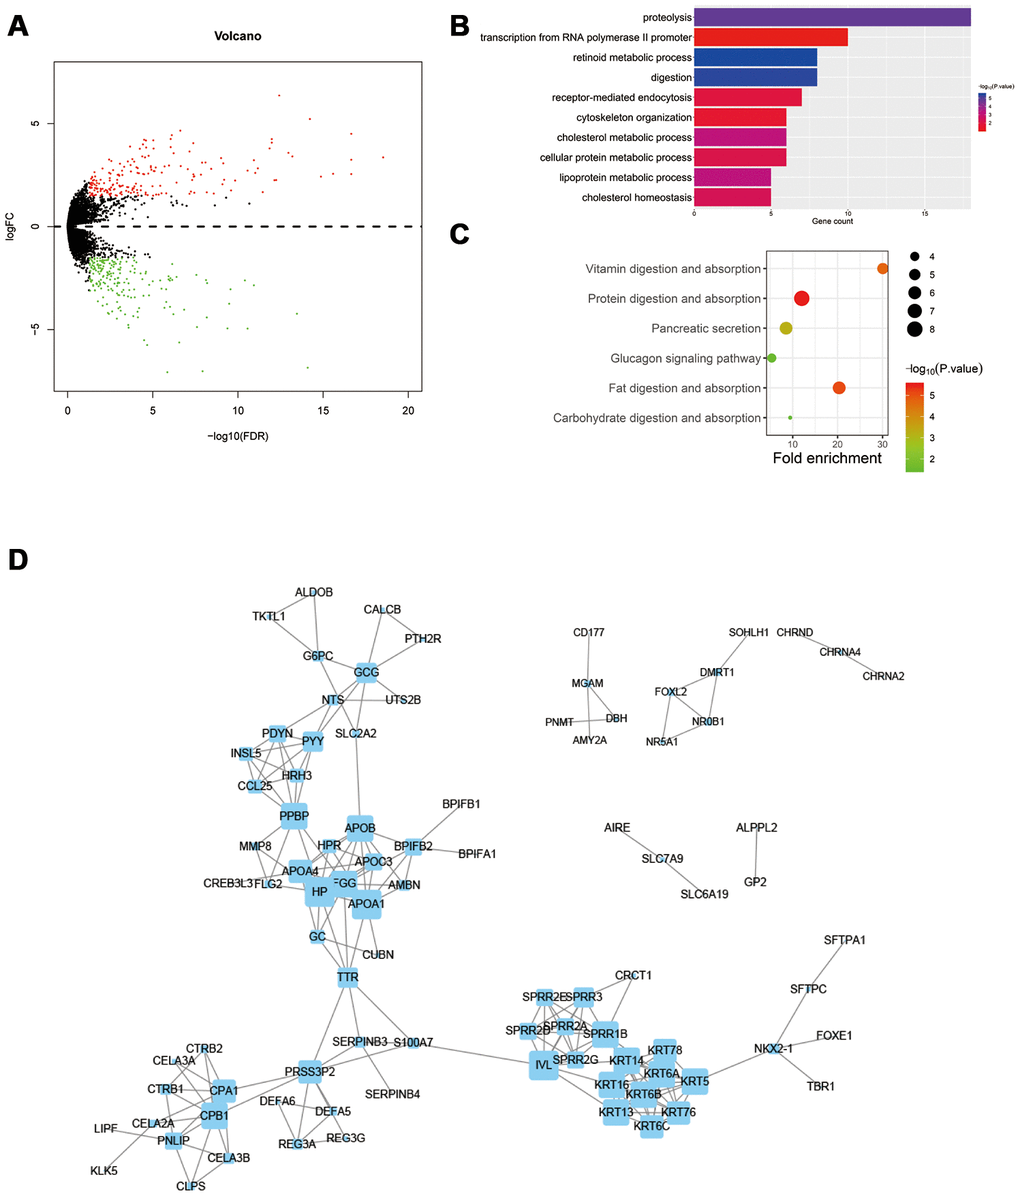 Differentially expressed genes in obesity patients are closely related to tumor regulation. (A) Differentially expressed genes (DEGs) between obesity and normal groups. (B) Gene Ontology (GO) analysis of DEGs. (C) KEGG pathway analysis of DEGs. (D) Protein-protein interaction (PPI) analysis of DEGs.